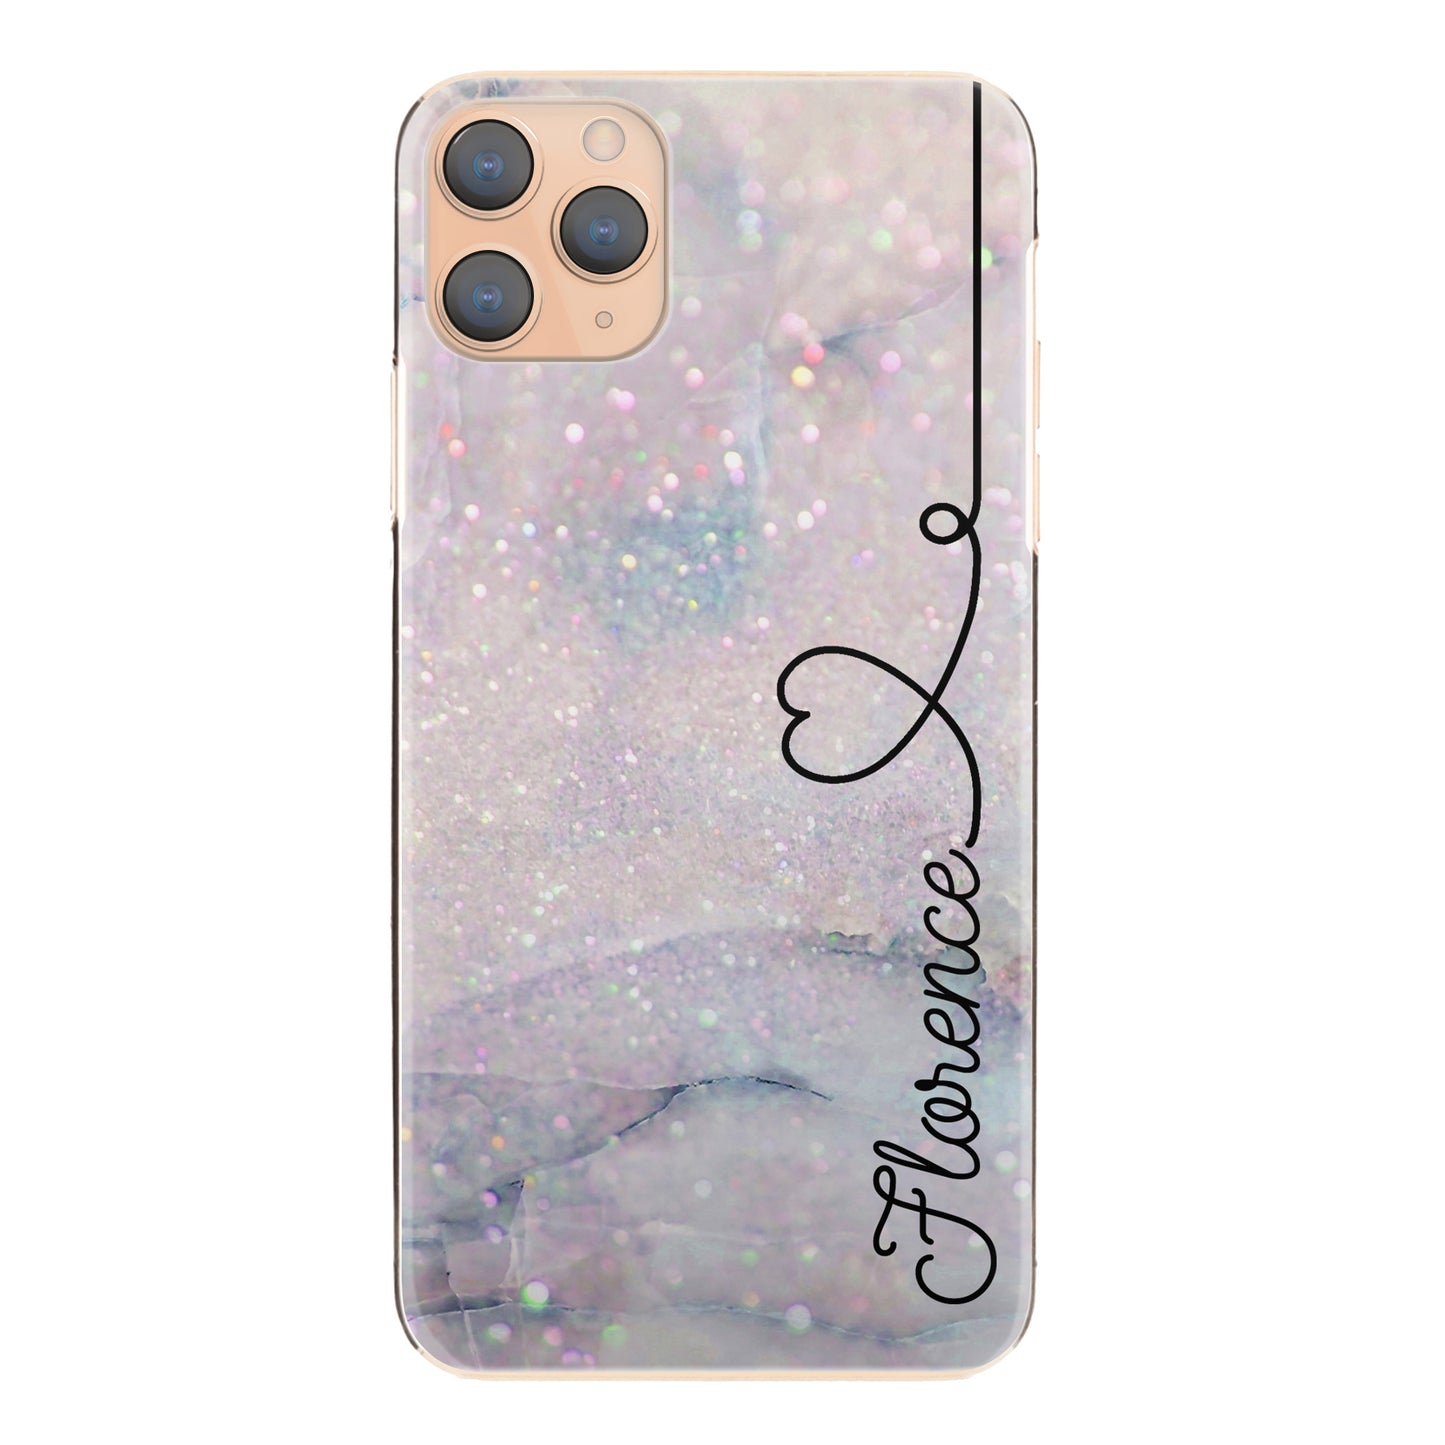 Personalised Nokia Phone Hard Case with Stylish Text and Heart Line on Textured Glitter Effect